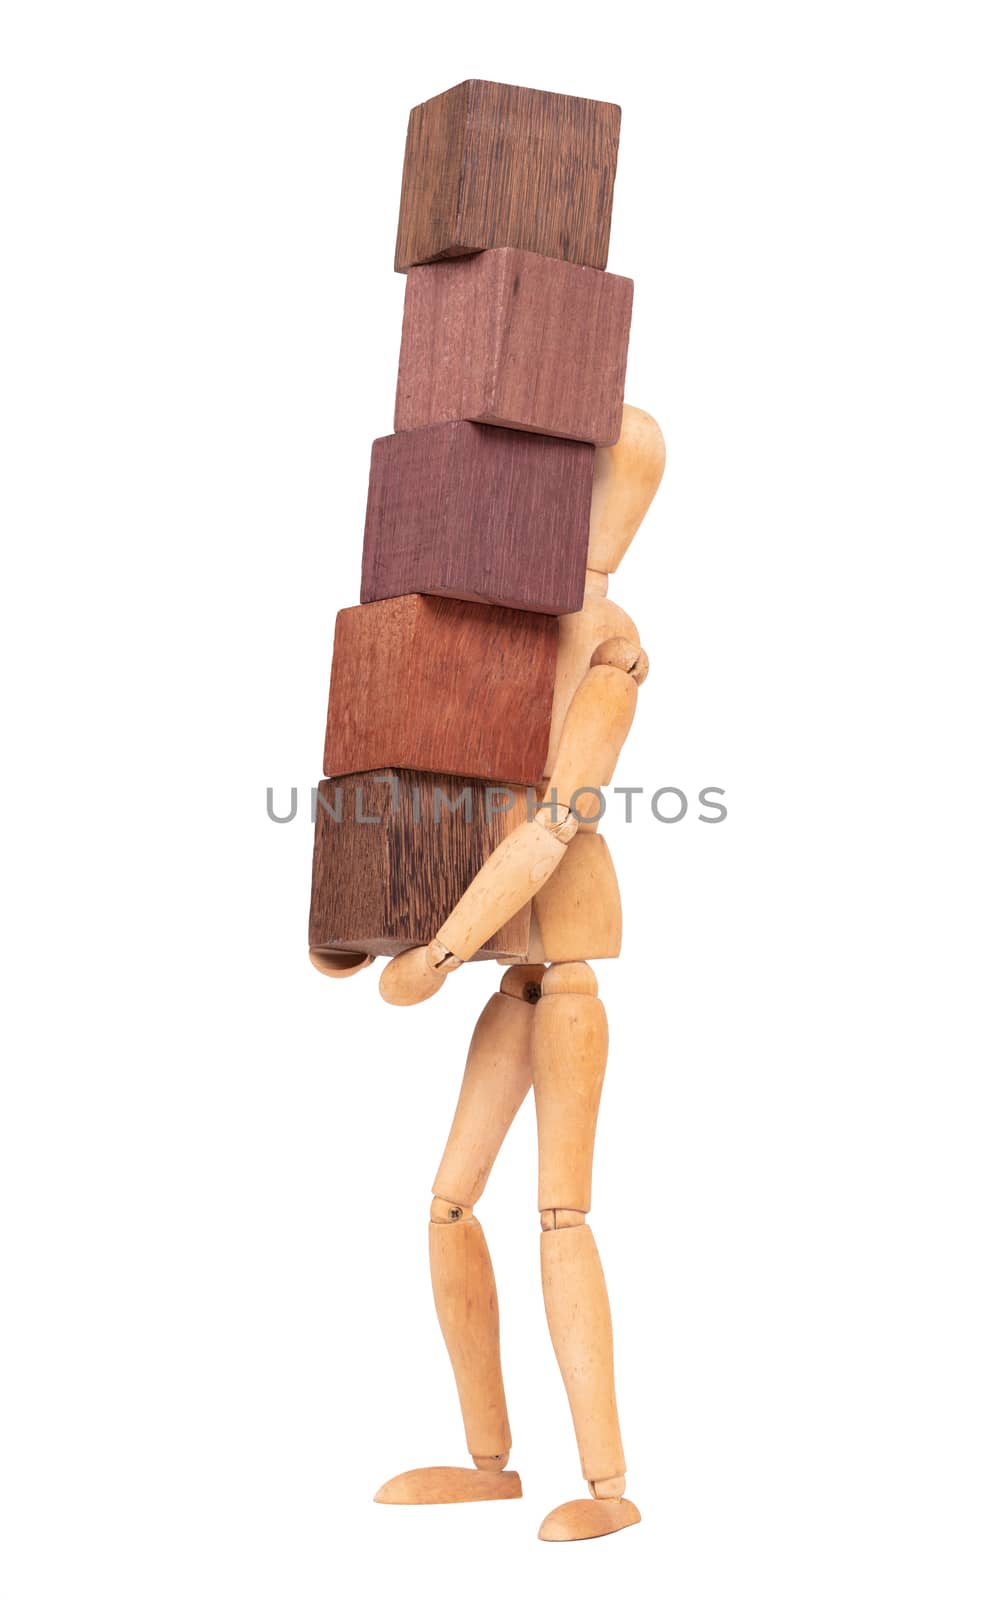 Wooden mannequin carrying wooden hardwood blocks, isolated on white